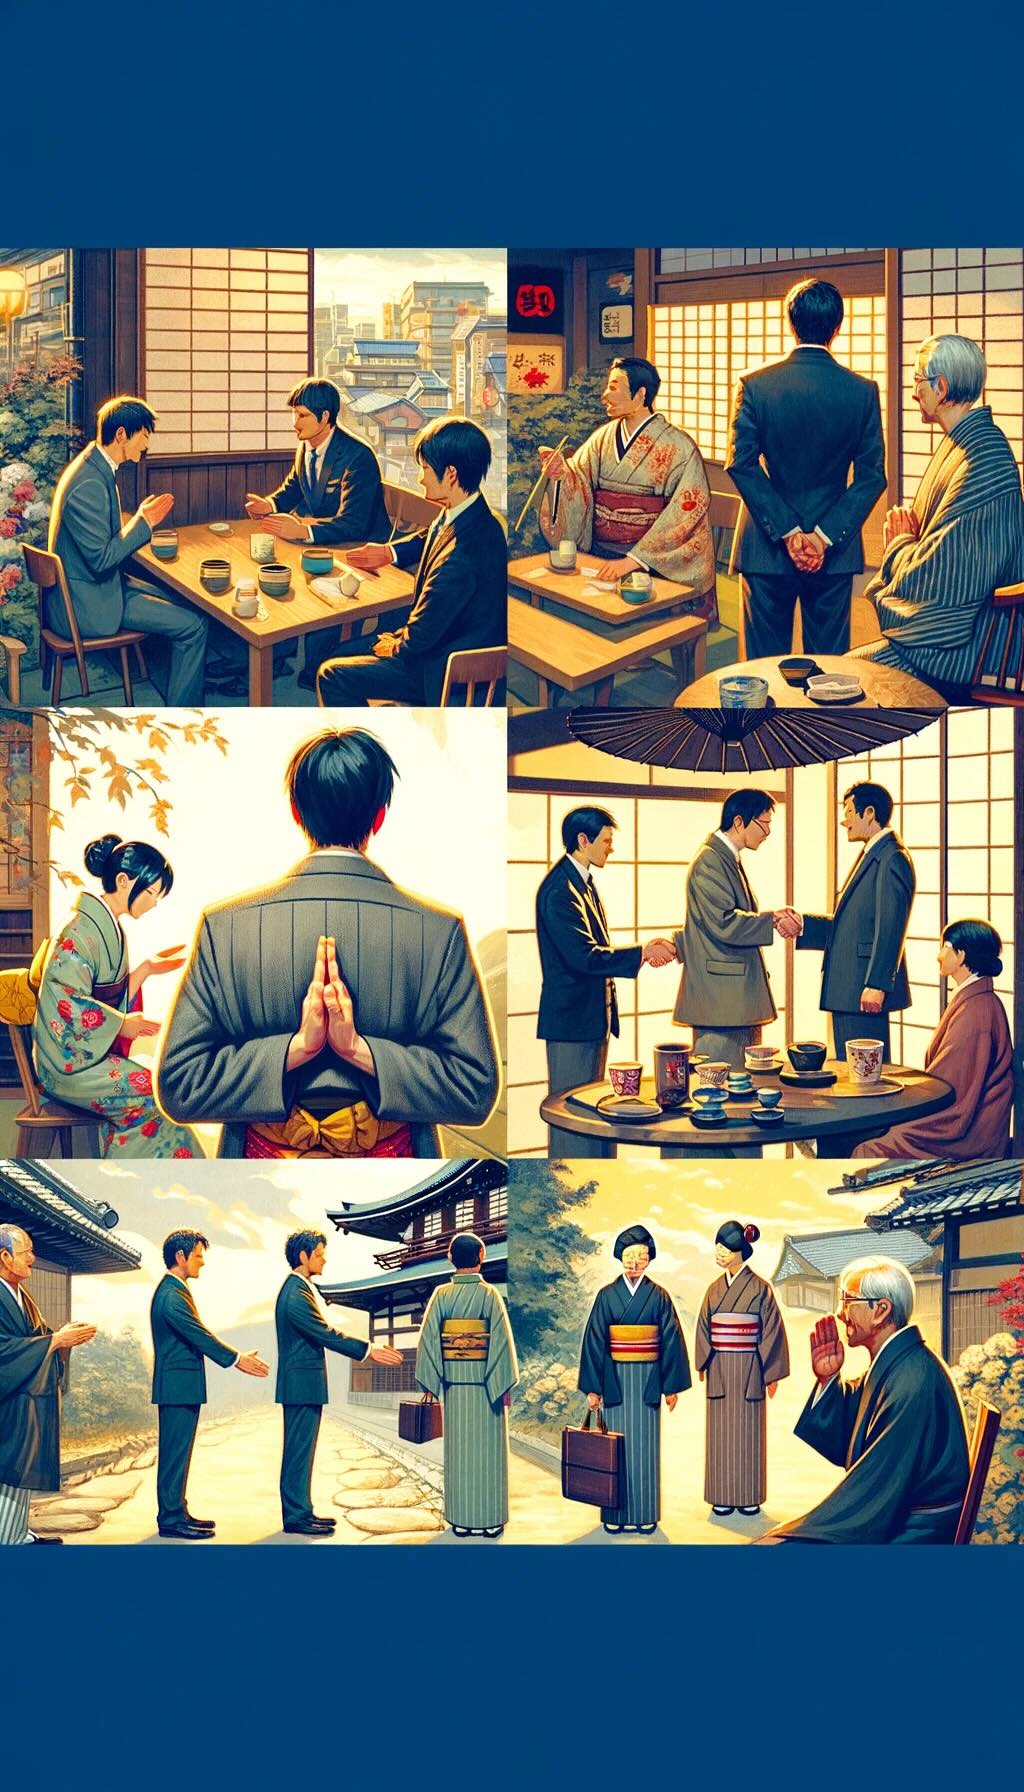 Greeting etiquette in various settings in Japan depicts social greetings in casual encounters like izakayas or tea houses, with light bows and phrases like 'Konnichiwa' or 'Ohayou'. The artwork illustrates professional greetings in business settings, highlighting deeper bows, handshakes, and formal language. Additionally, it shows greetings with elders or superiors, emphasizing deeper bows, respectful language, and an attitude of reverence. Each scene in the image captures the warmth in casual greetings, the professionalism in business encounters, and the deference in greeting elders and superiors, reflecting the harmony and respect embedded in Japanese greeting customs